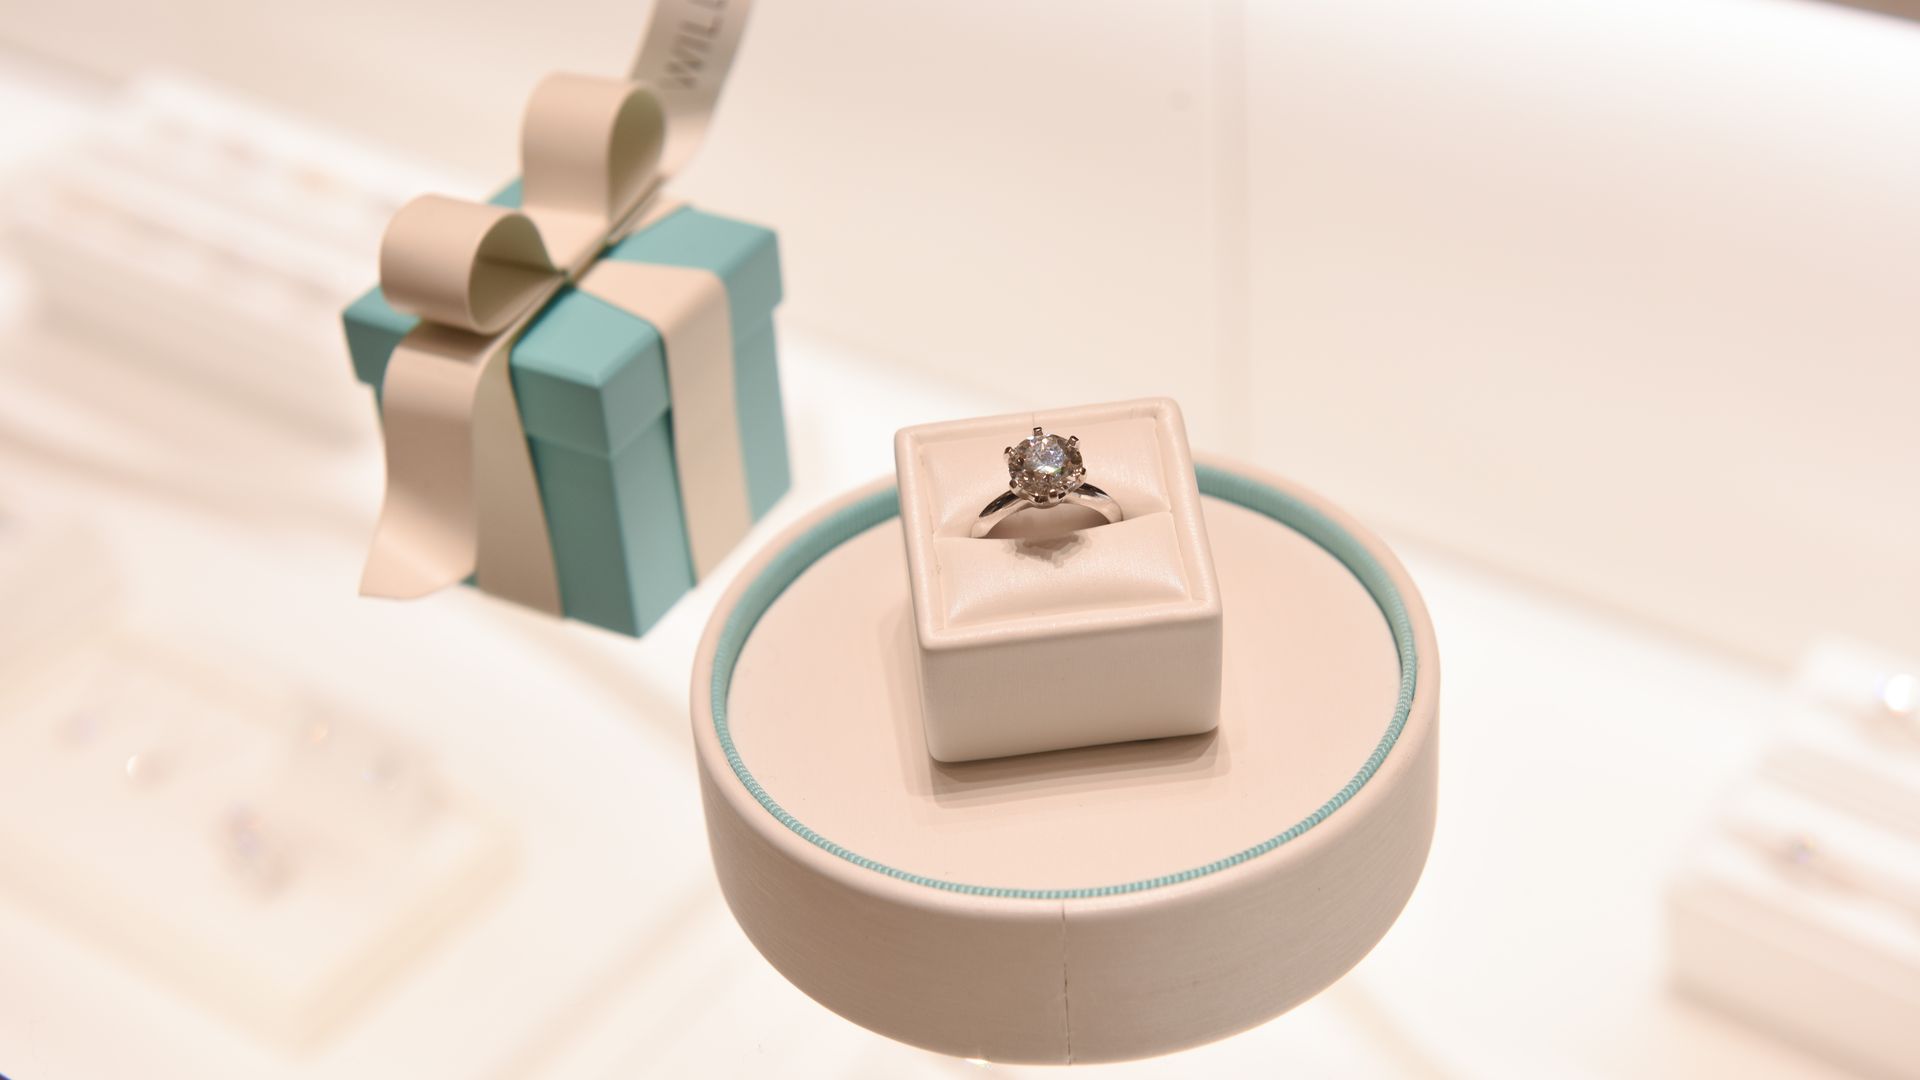 A diamond ring next to a turquoise jewelry box